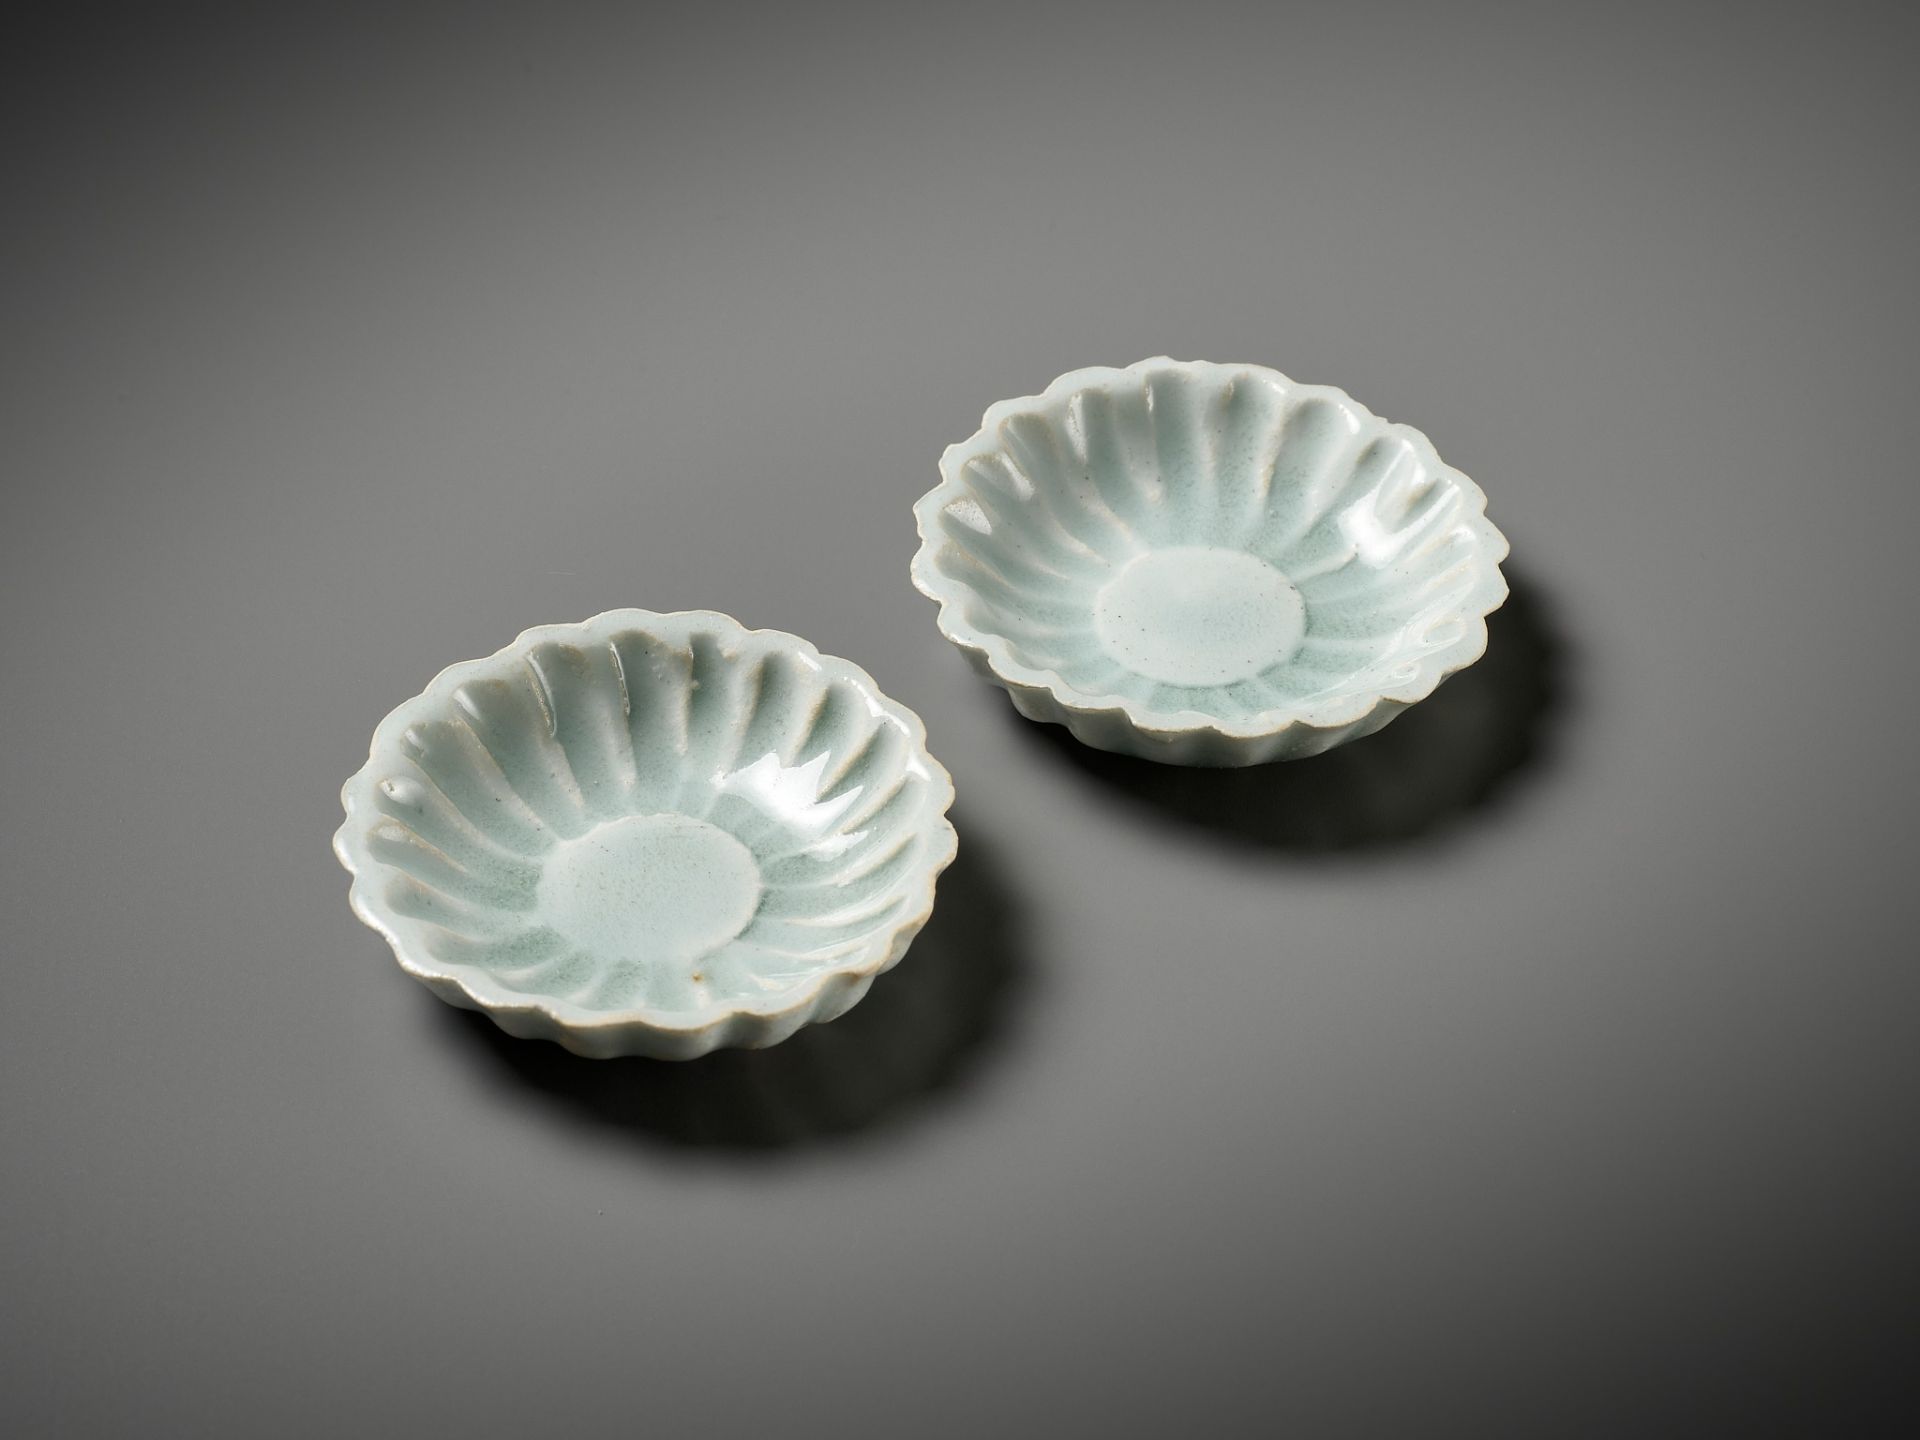 A PAIR OF QINGBAI 'CHRYSANTHEMUM' MINIATURE DISHES, SONG DYNASTY - Image 3 of 7